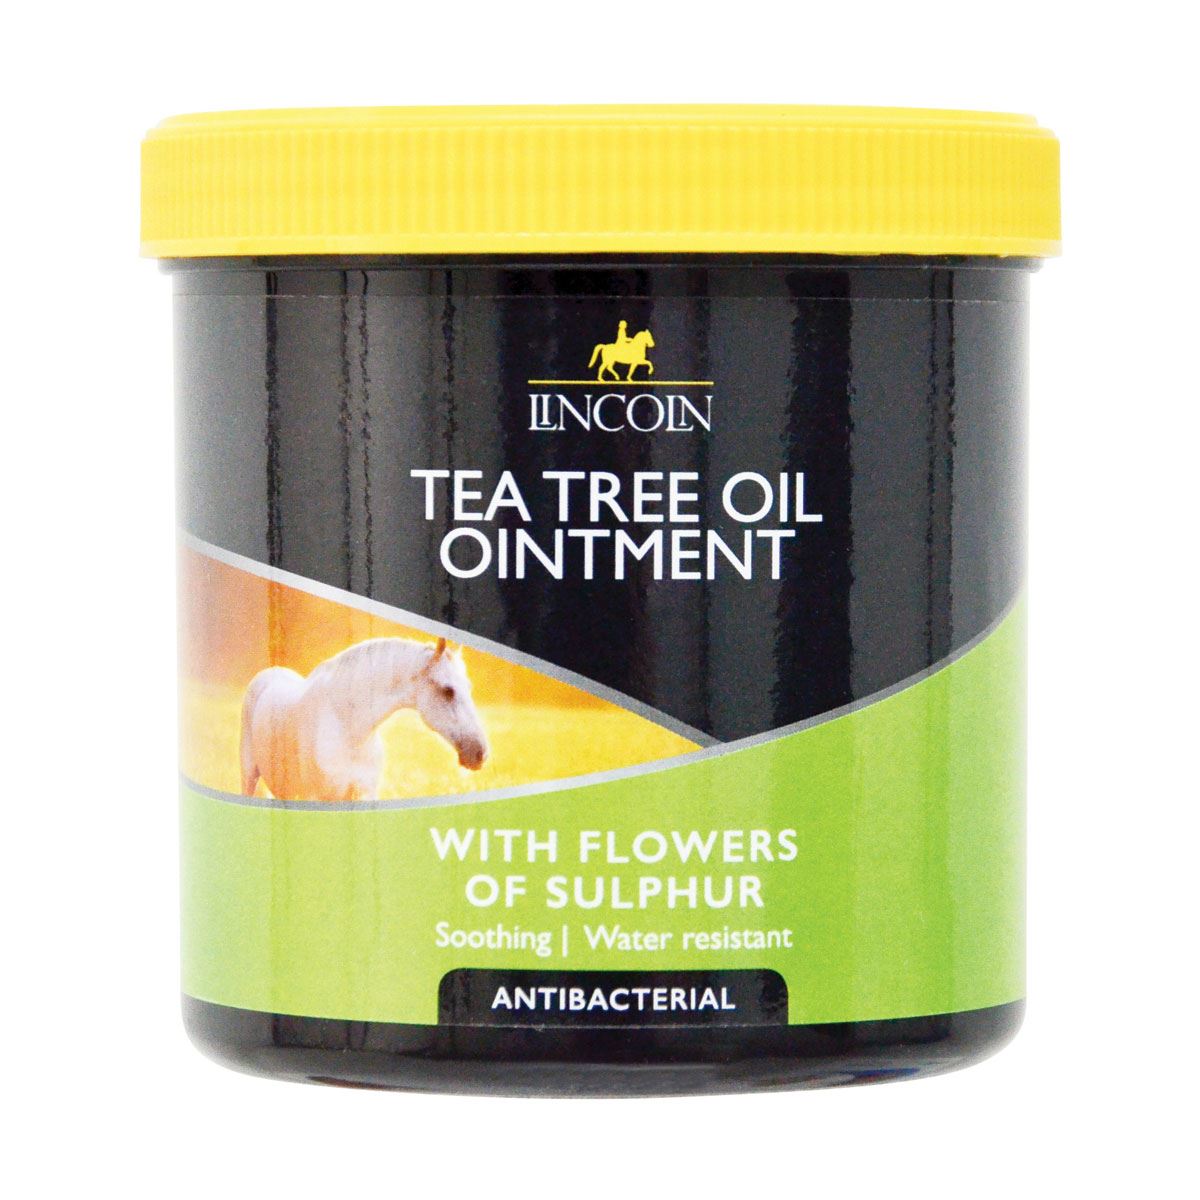 Lincoln Tea Tree Oil Ointment - Just Horse Riders